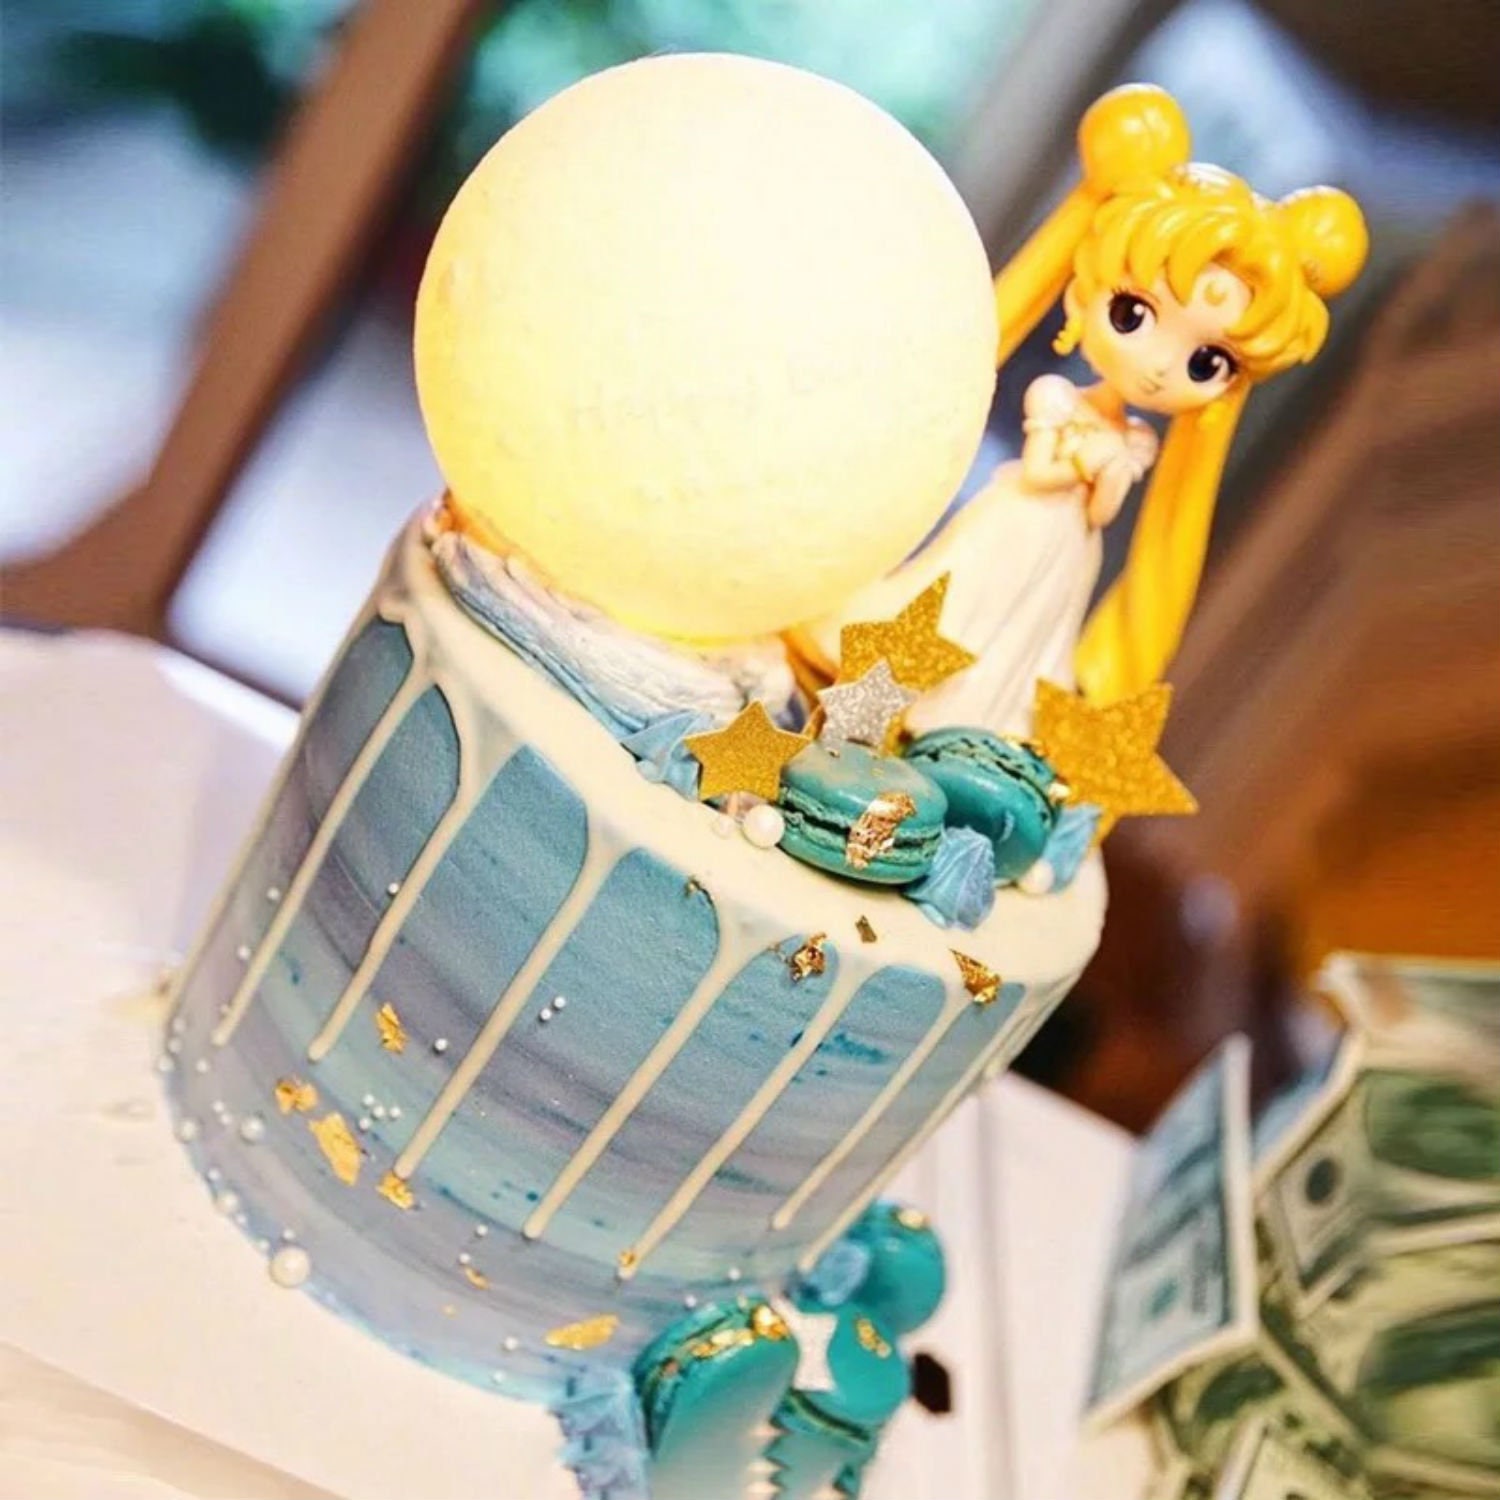 Sailor Moon Light Up Wedding Birthday Cake Topper Bridal Shower Any Occasio...